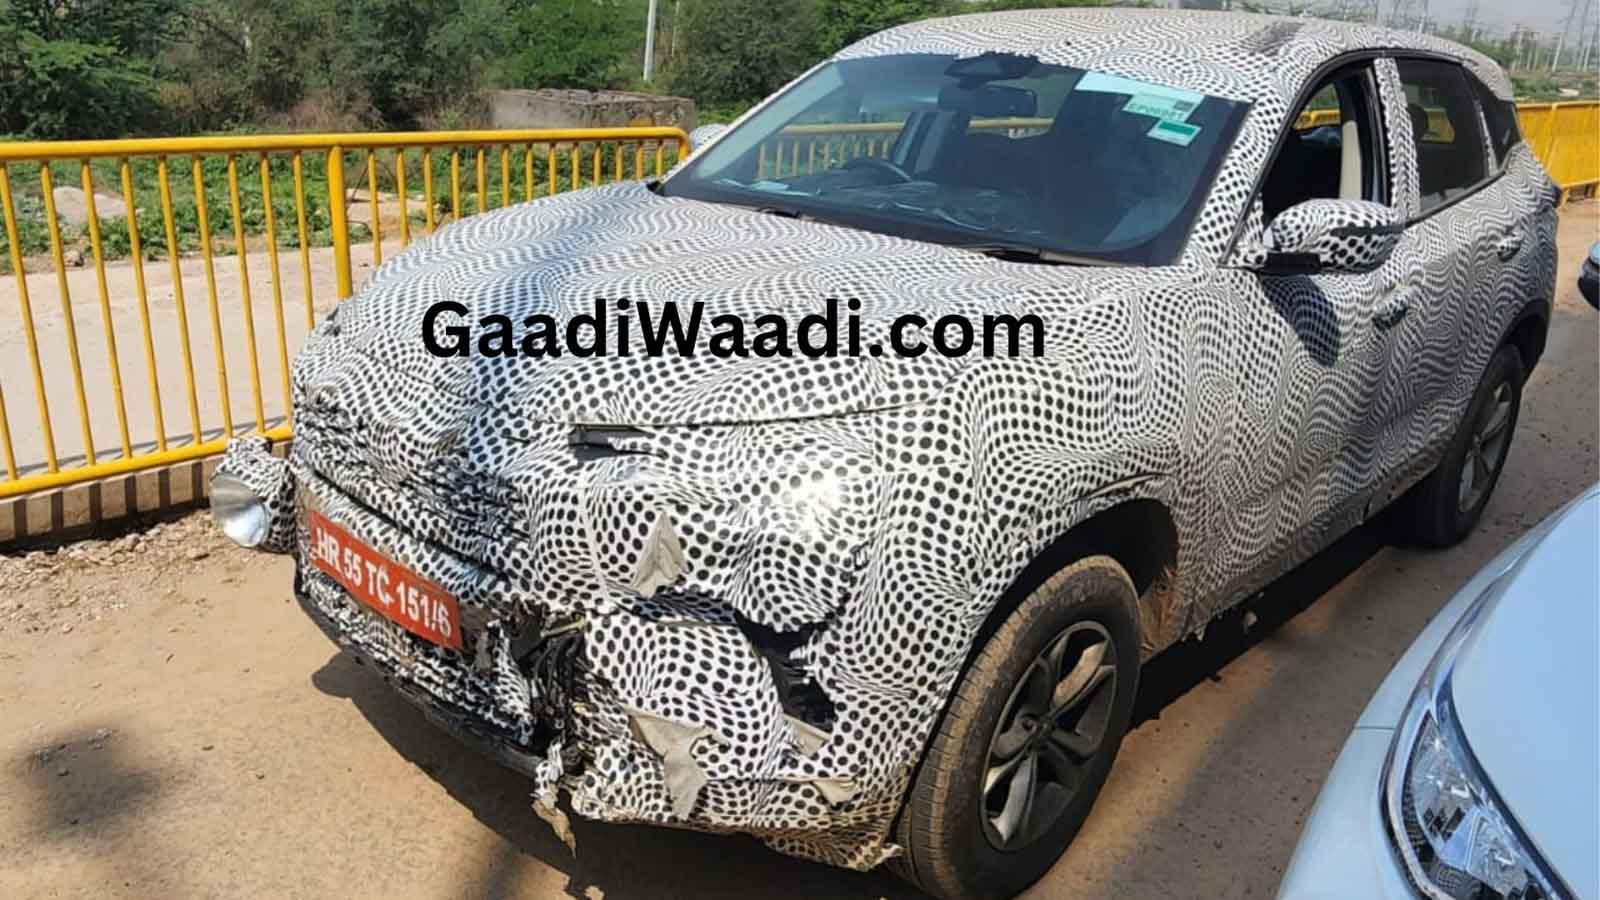 Tata Harrier Facelift Spied Testing; Previews Interior And Exterior Updates